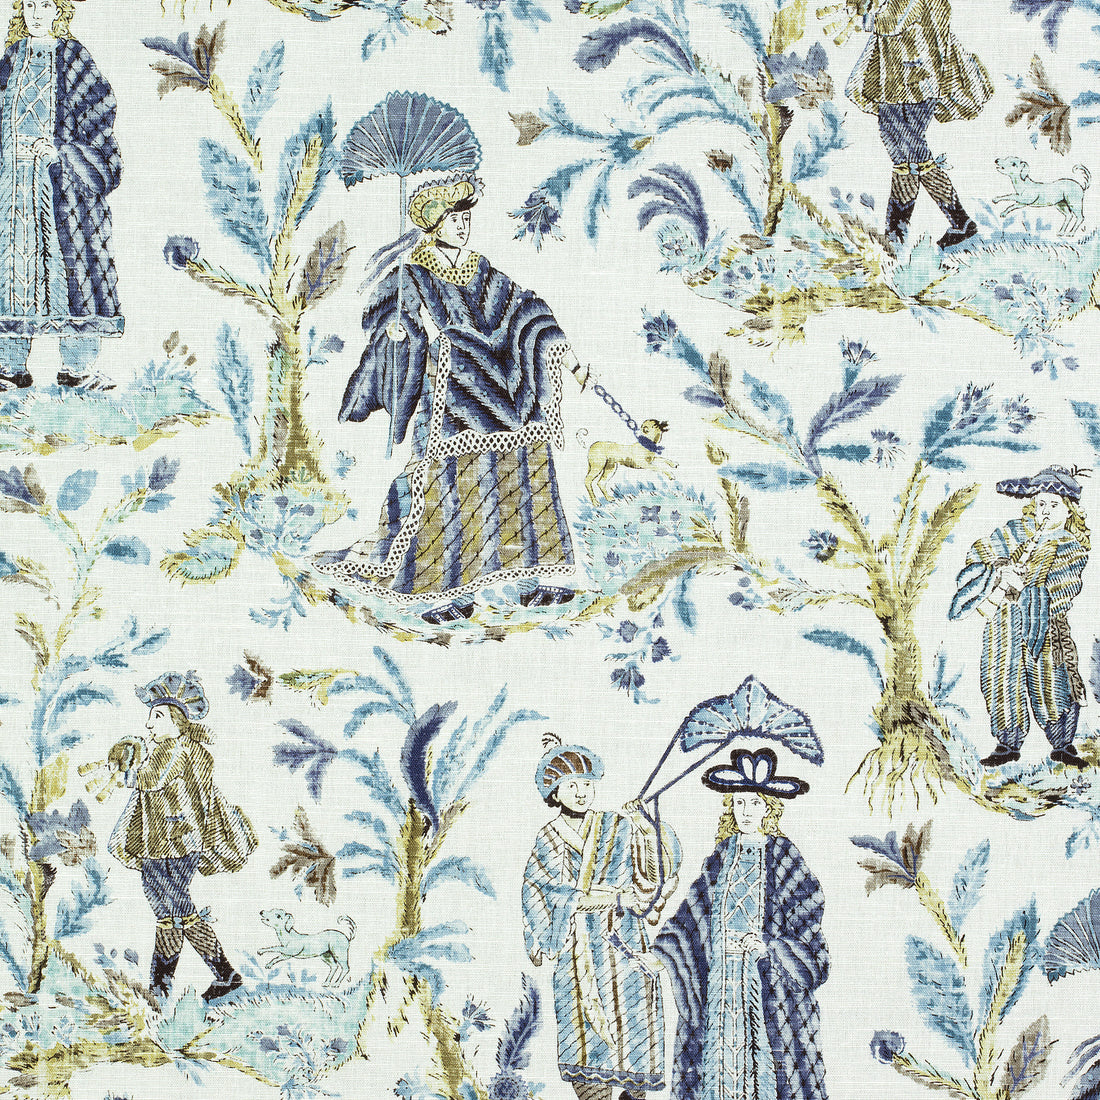 Royale Toile fabric in turquoise and navy color - pattern number F972574 - by Thibaut in the Chestnut Hill collection